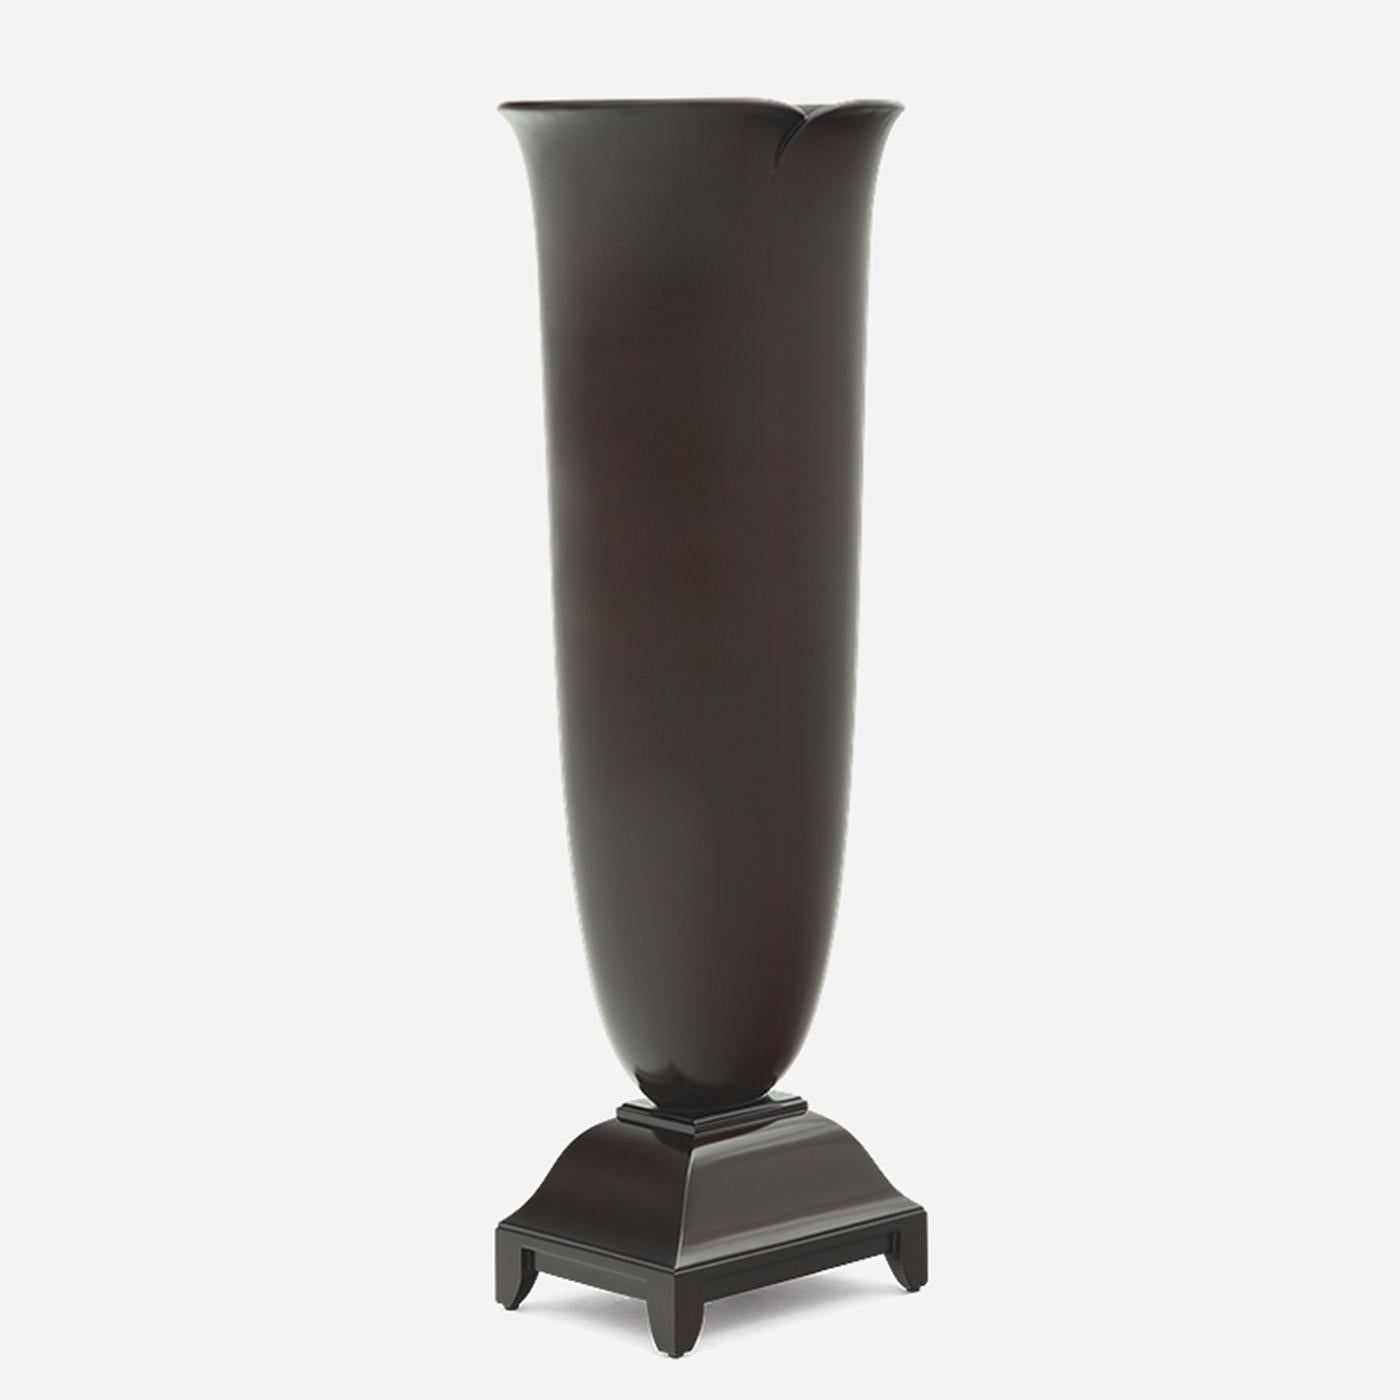 Vase the mahogany in solid hand carved mahogany
wood in espresso finish. Also available in coffee
finish, black satin, white lacquered or tobacco finish.